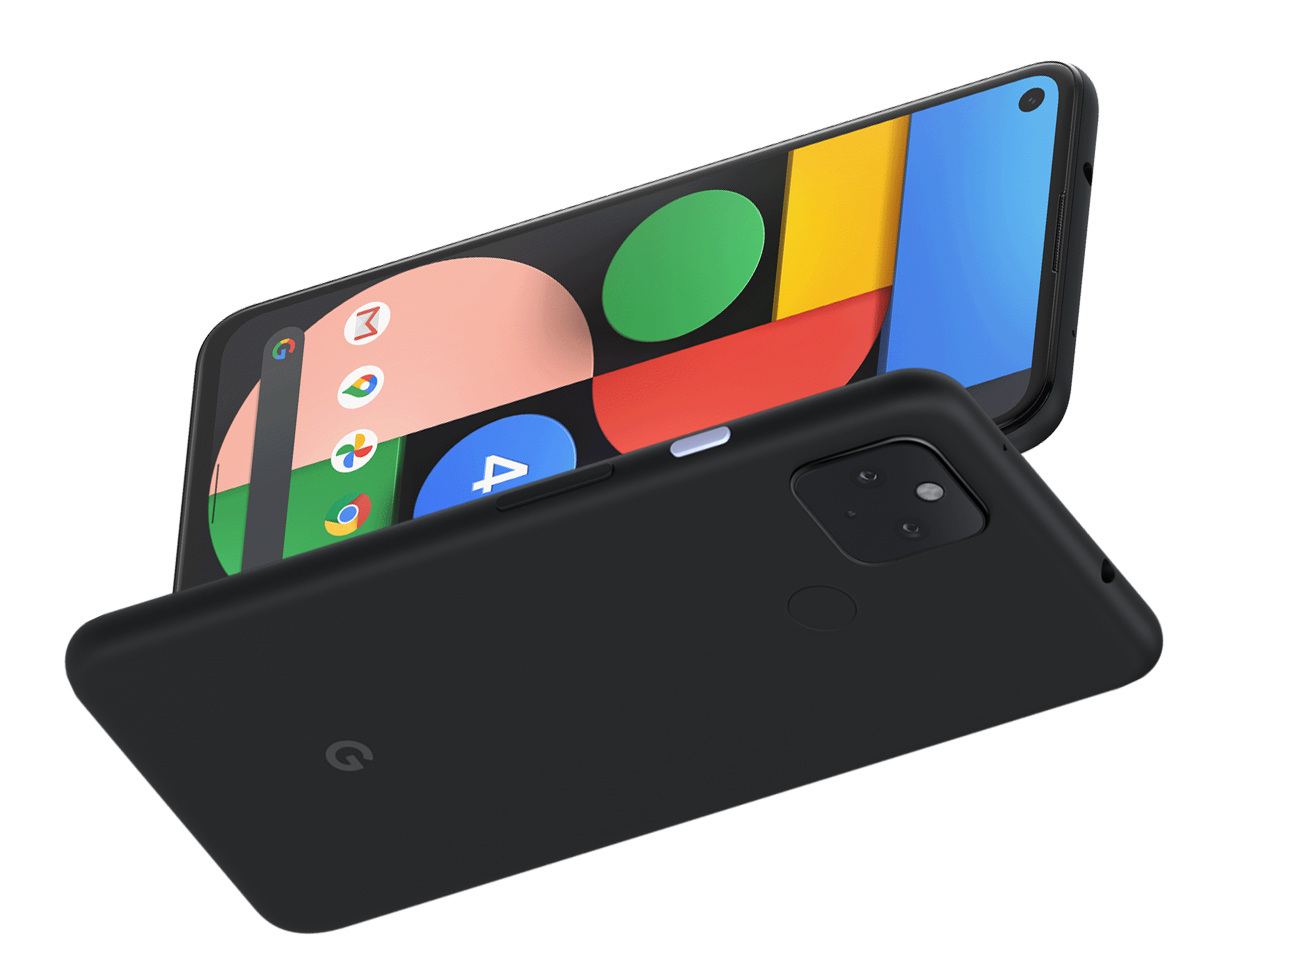 Google Pixel 4a 5G: Review results - NotebookCheck.net Reviews